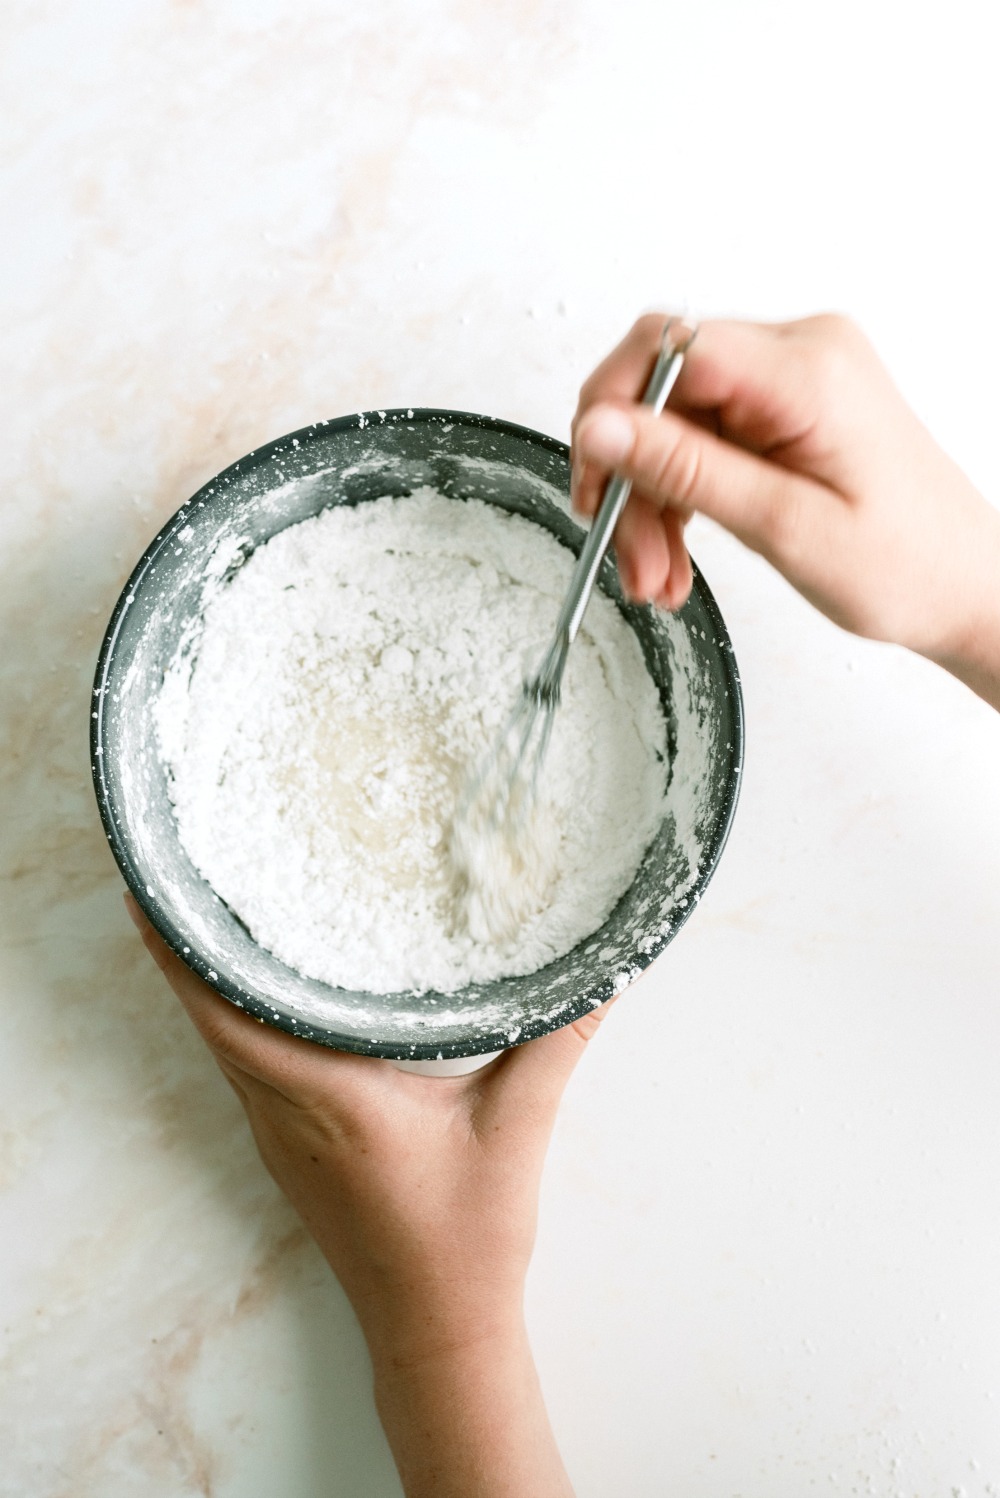 Powdered sugar frosting ingredients mixed in a bowl